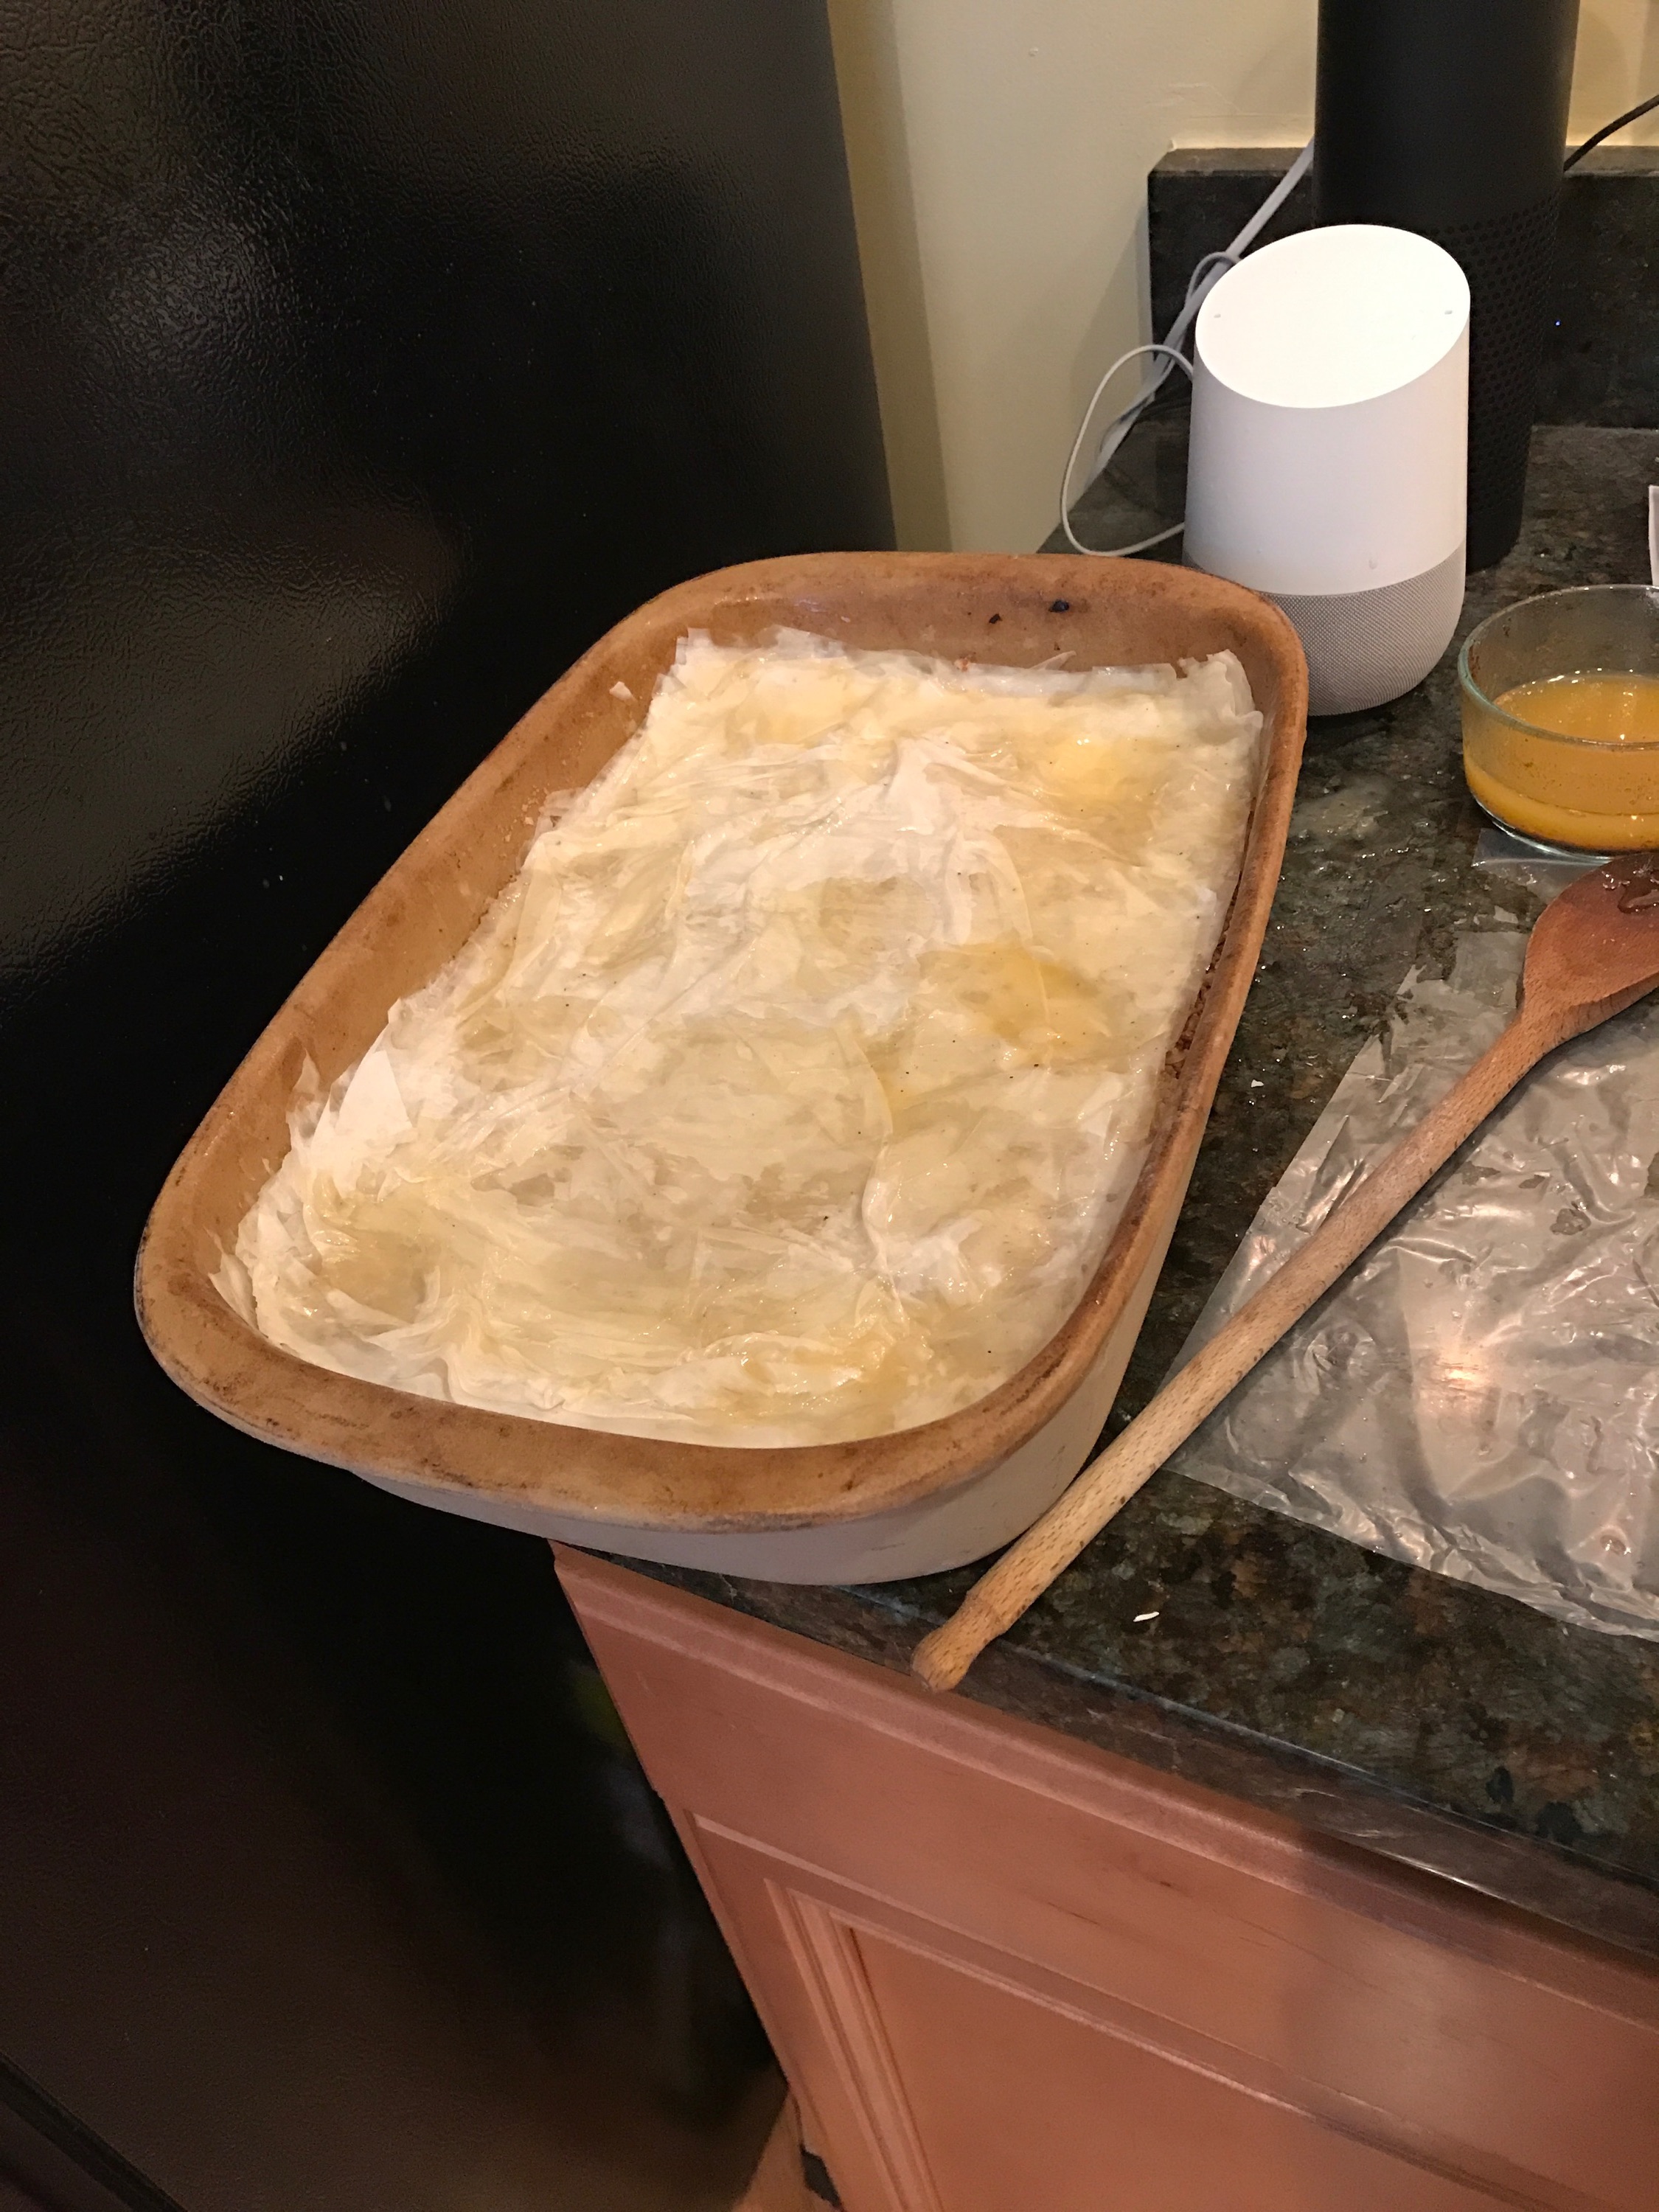 2 inches worth of phyllo